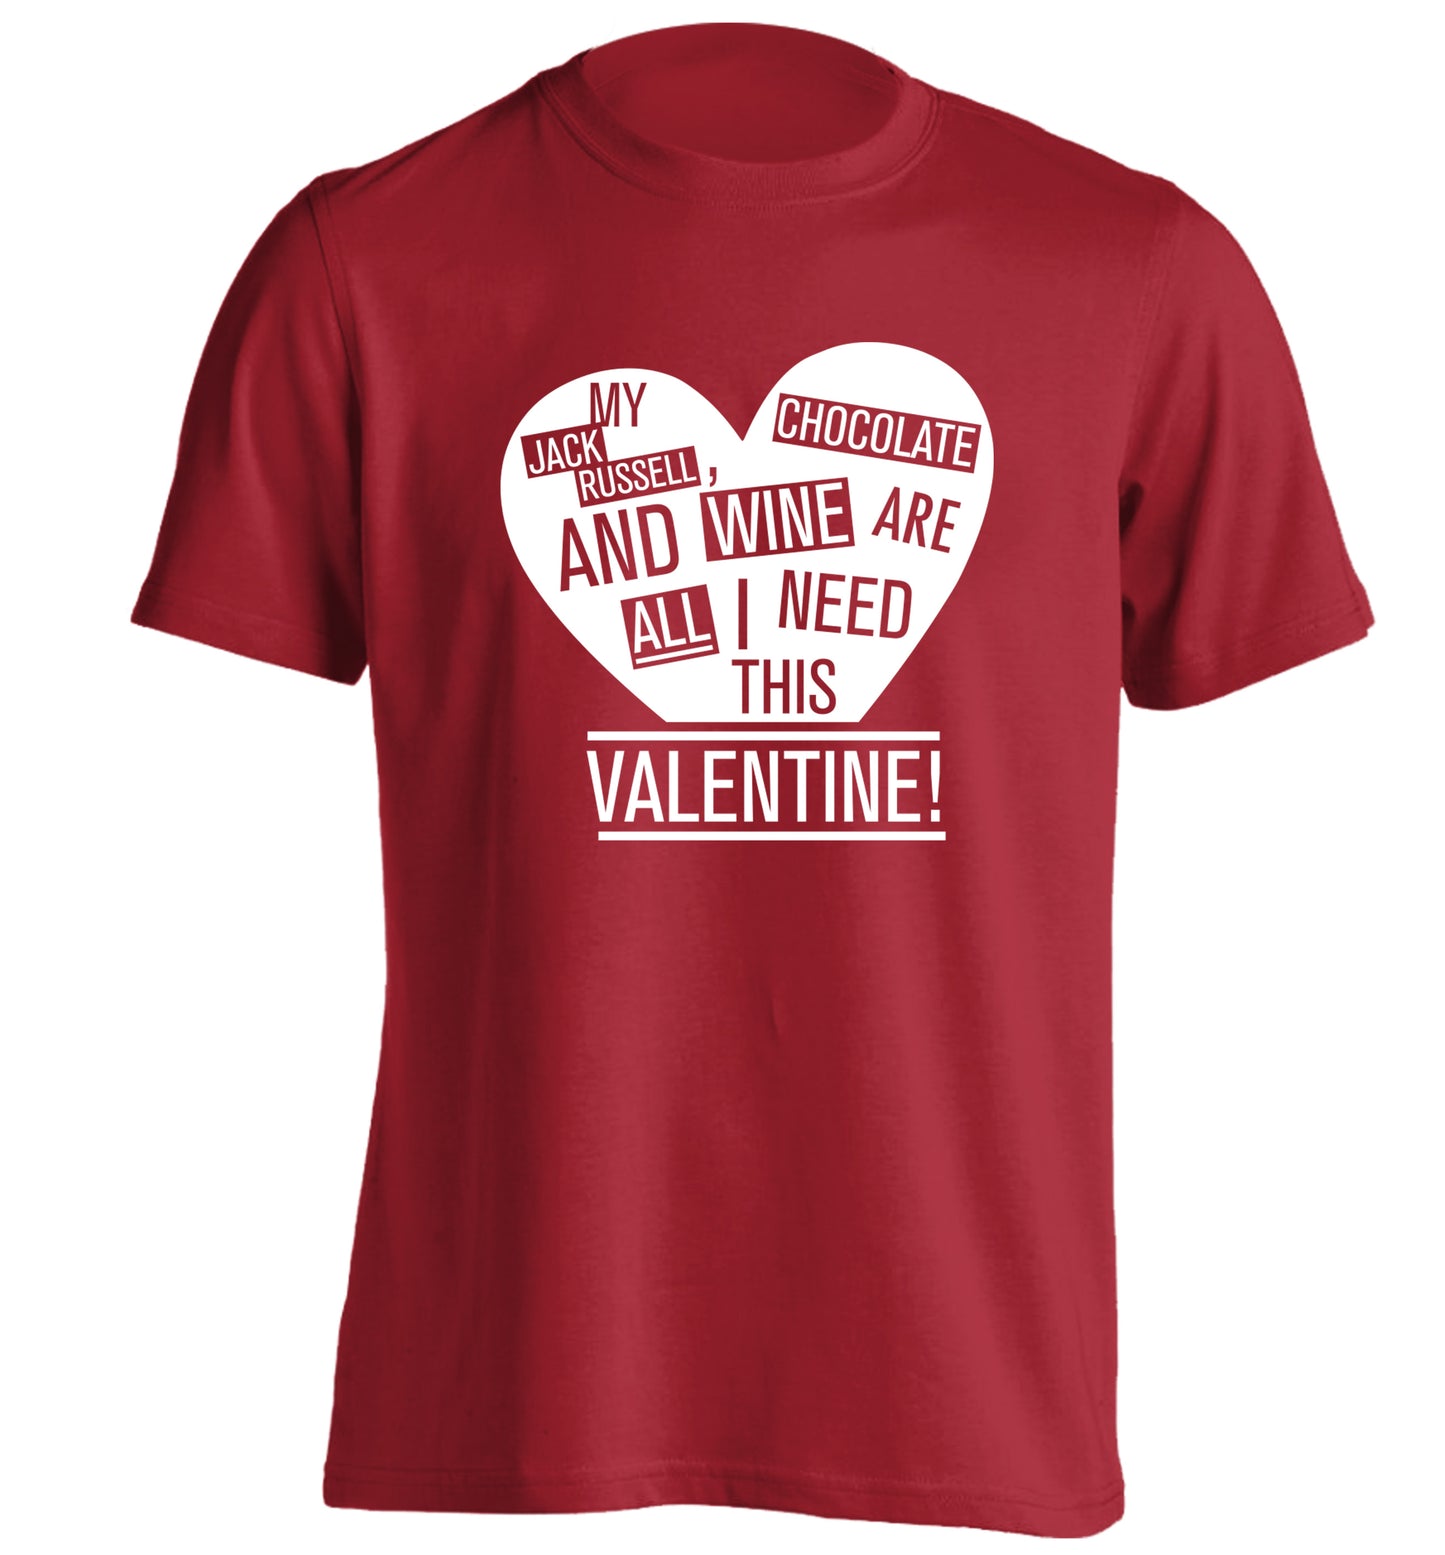 My jack russell, chocolate and wine are all I need this valentine! adults unisex red Tshirt 2XL